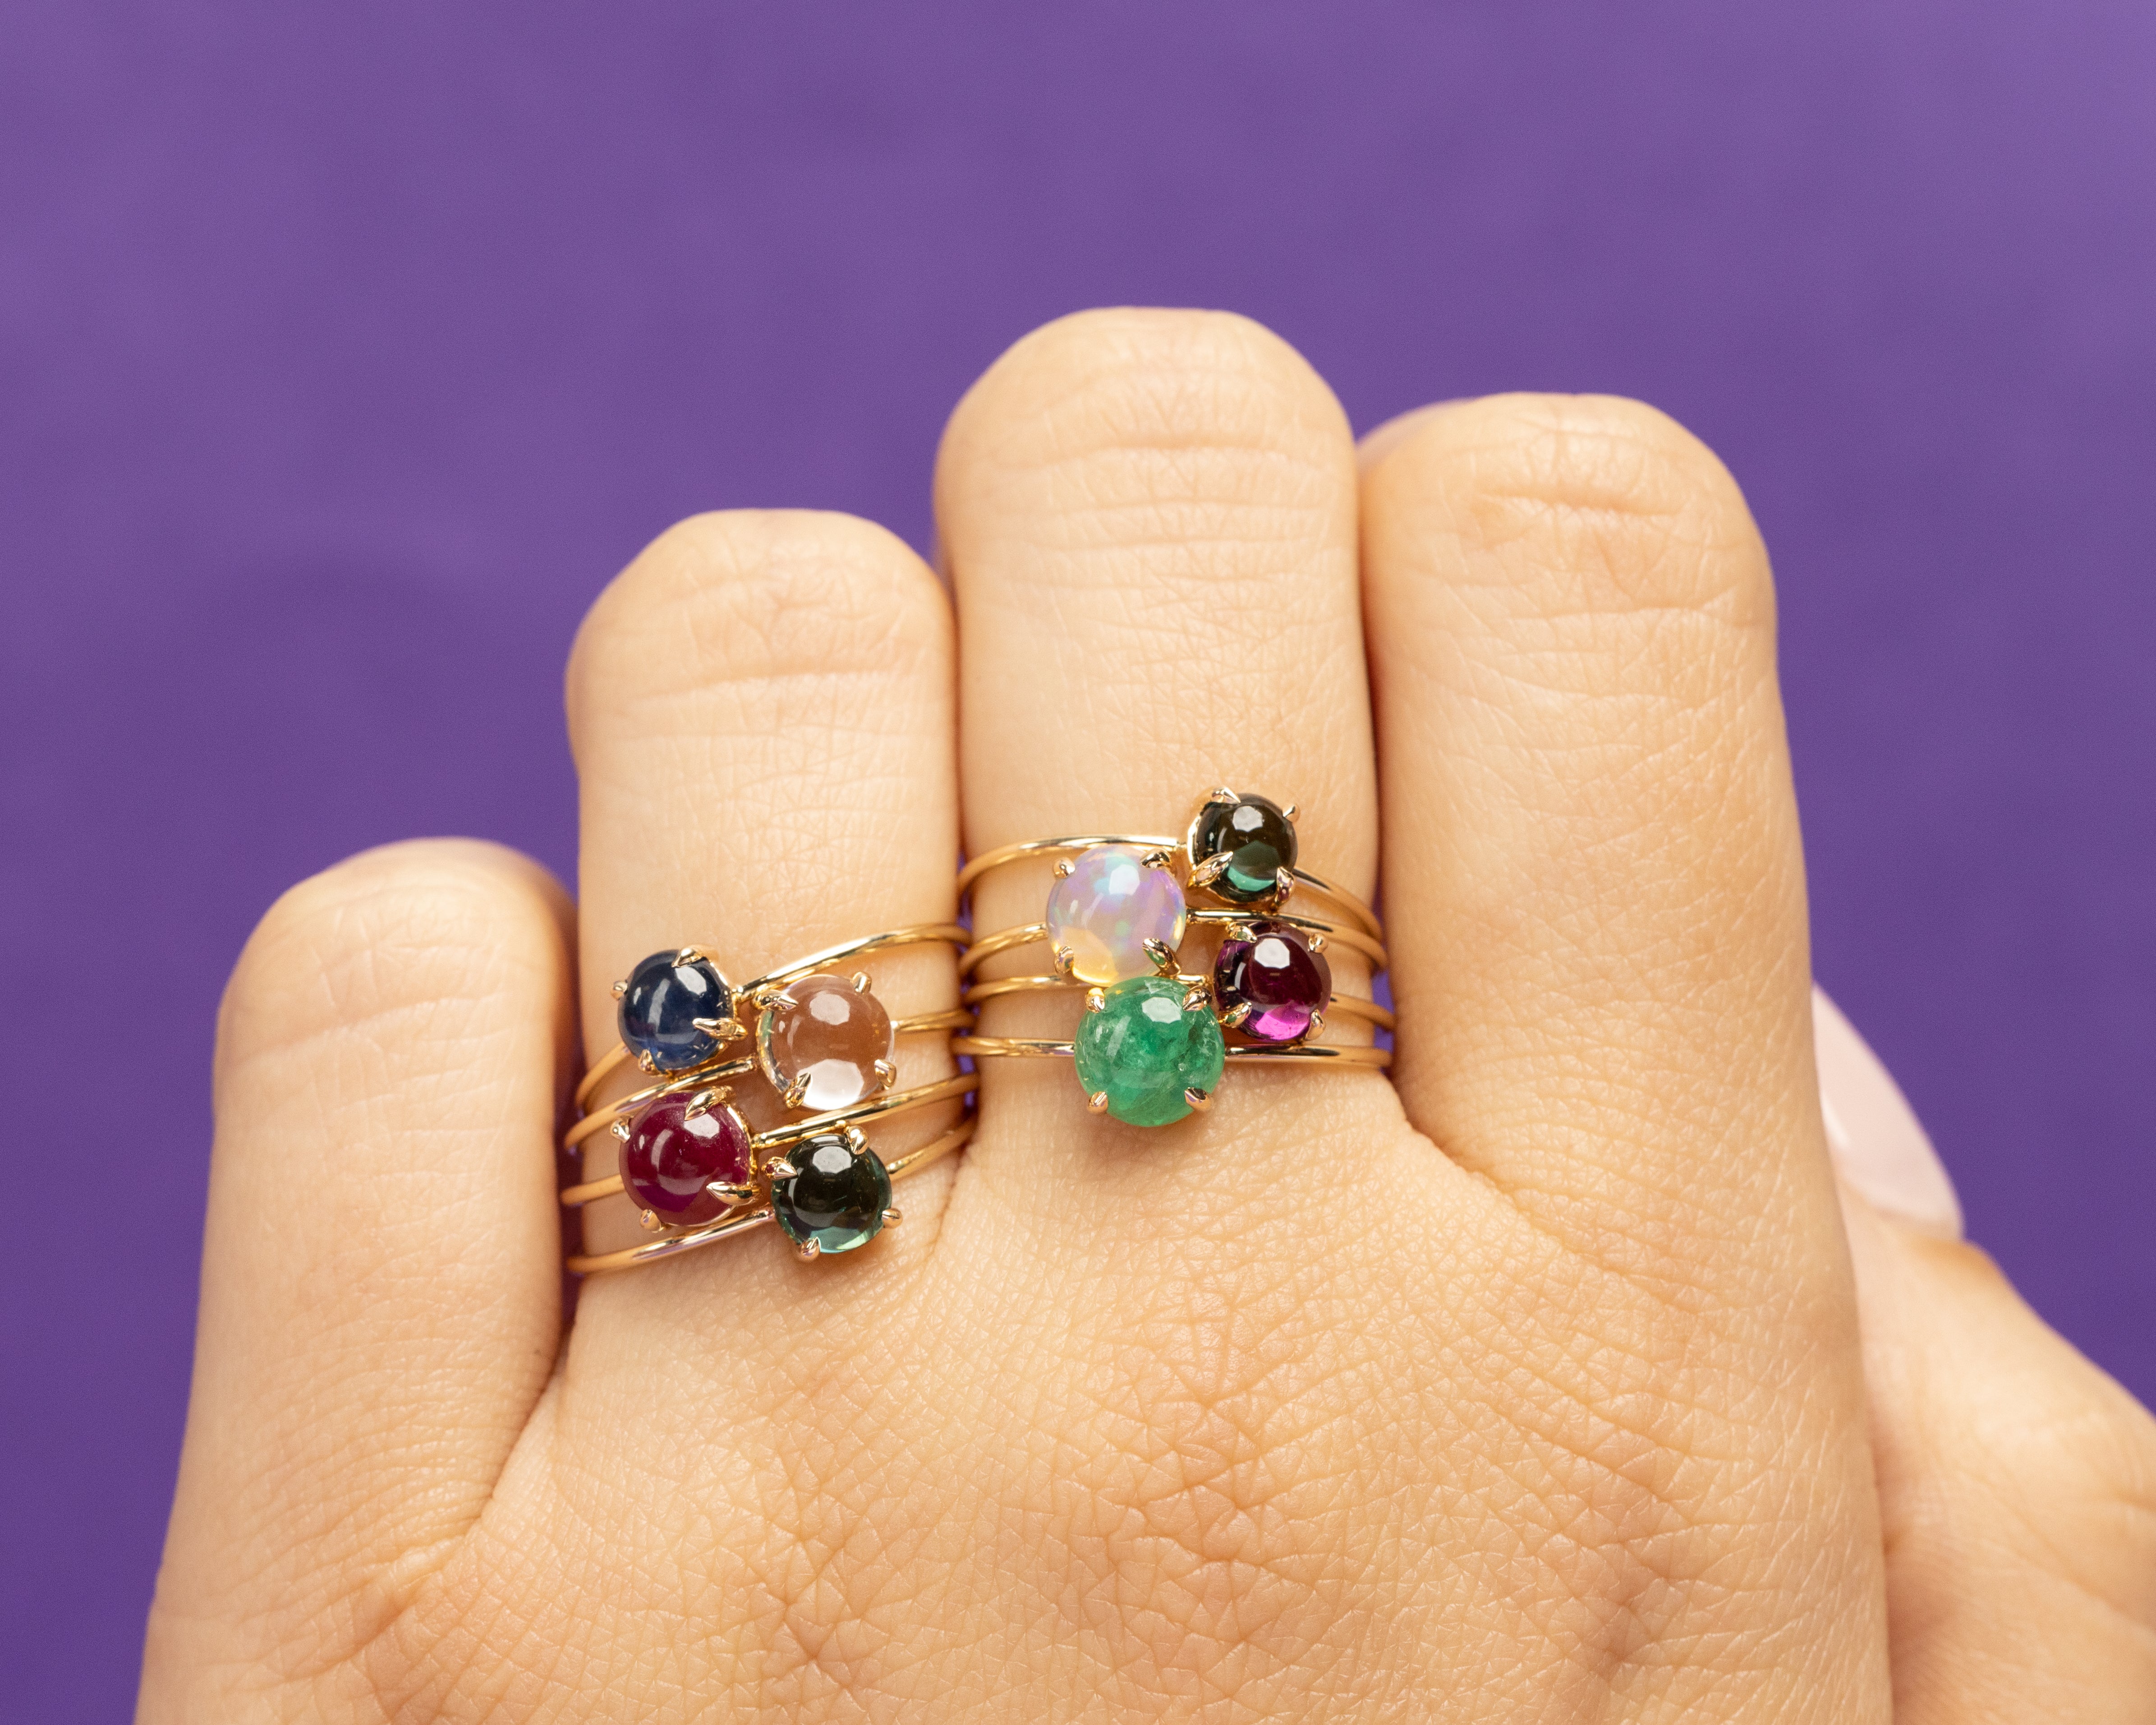 Mix & Match Starflower's Colored Stone Microstrackable Rings to Match Your Style!